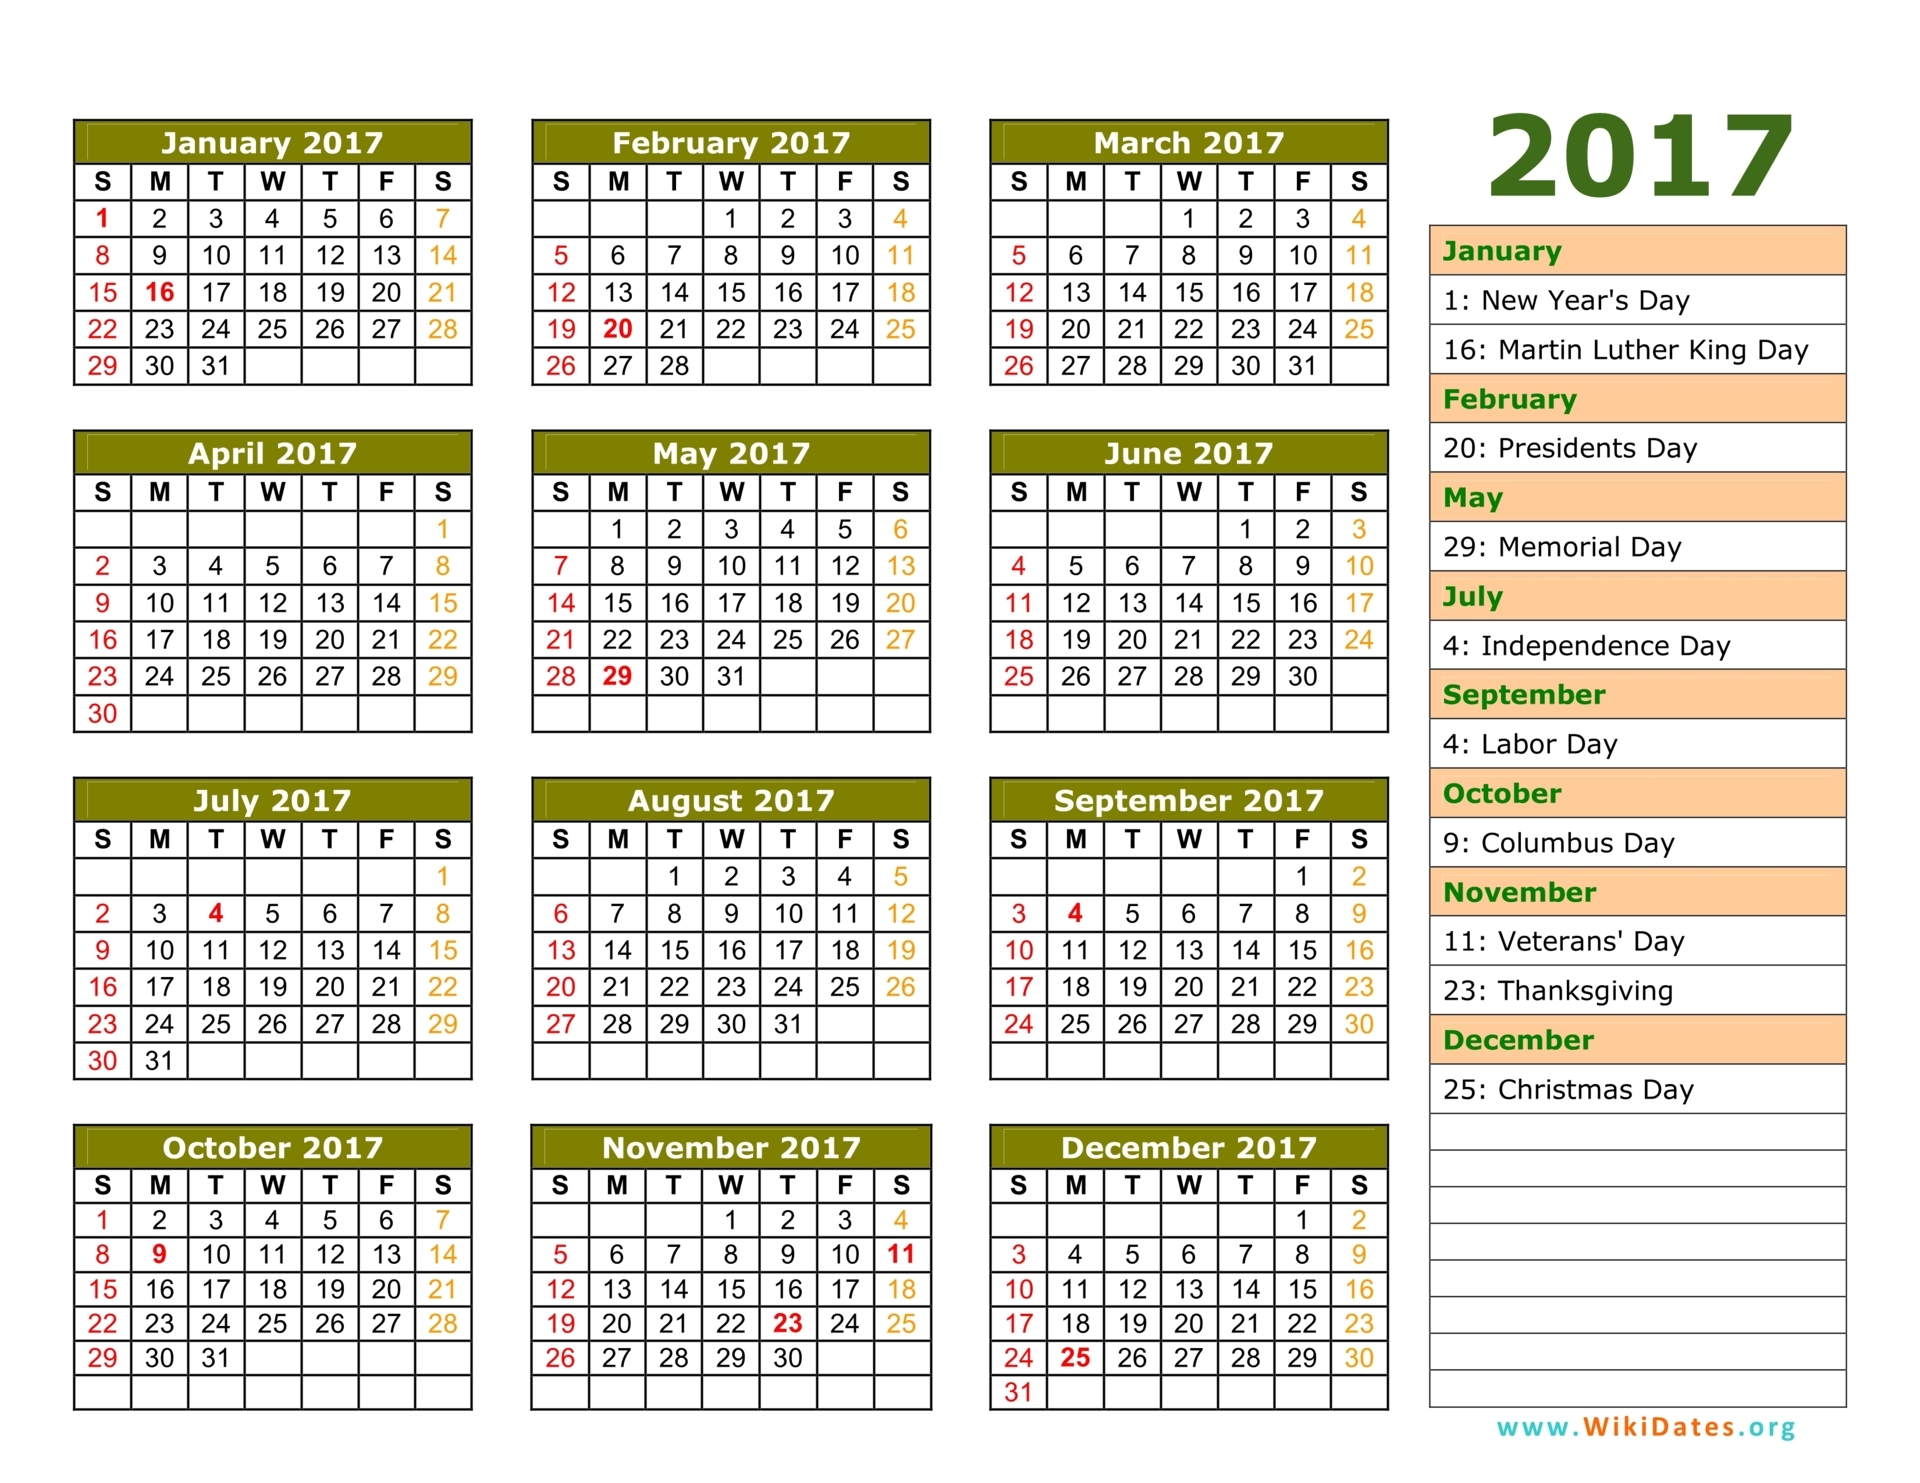 Calendar 2016 And 2017 Template from www.wikidates.org